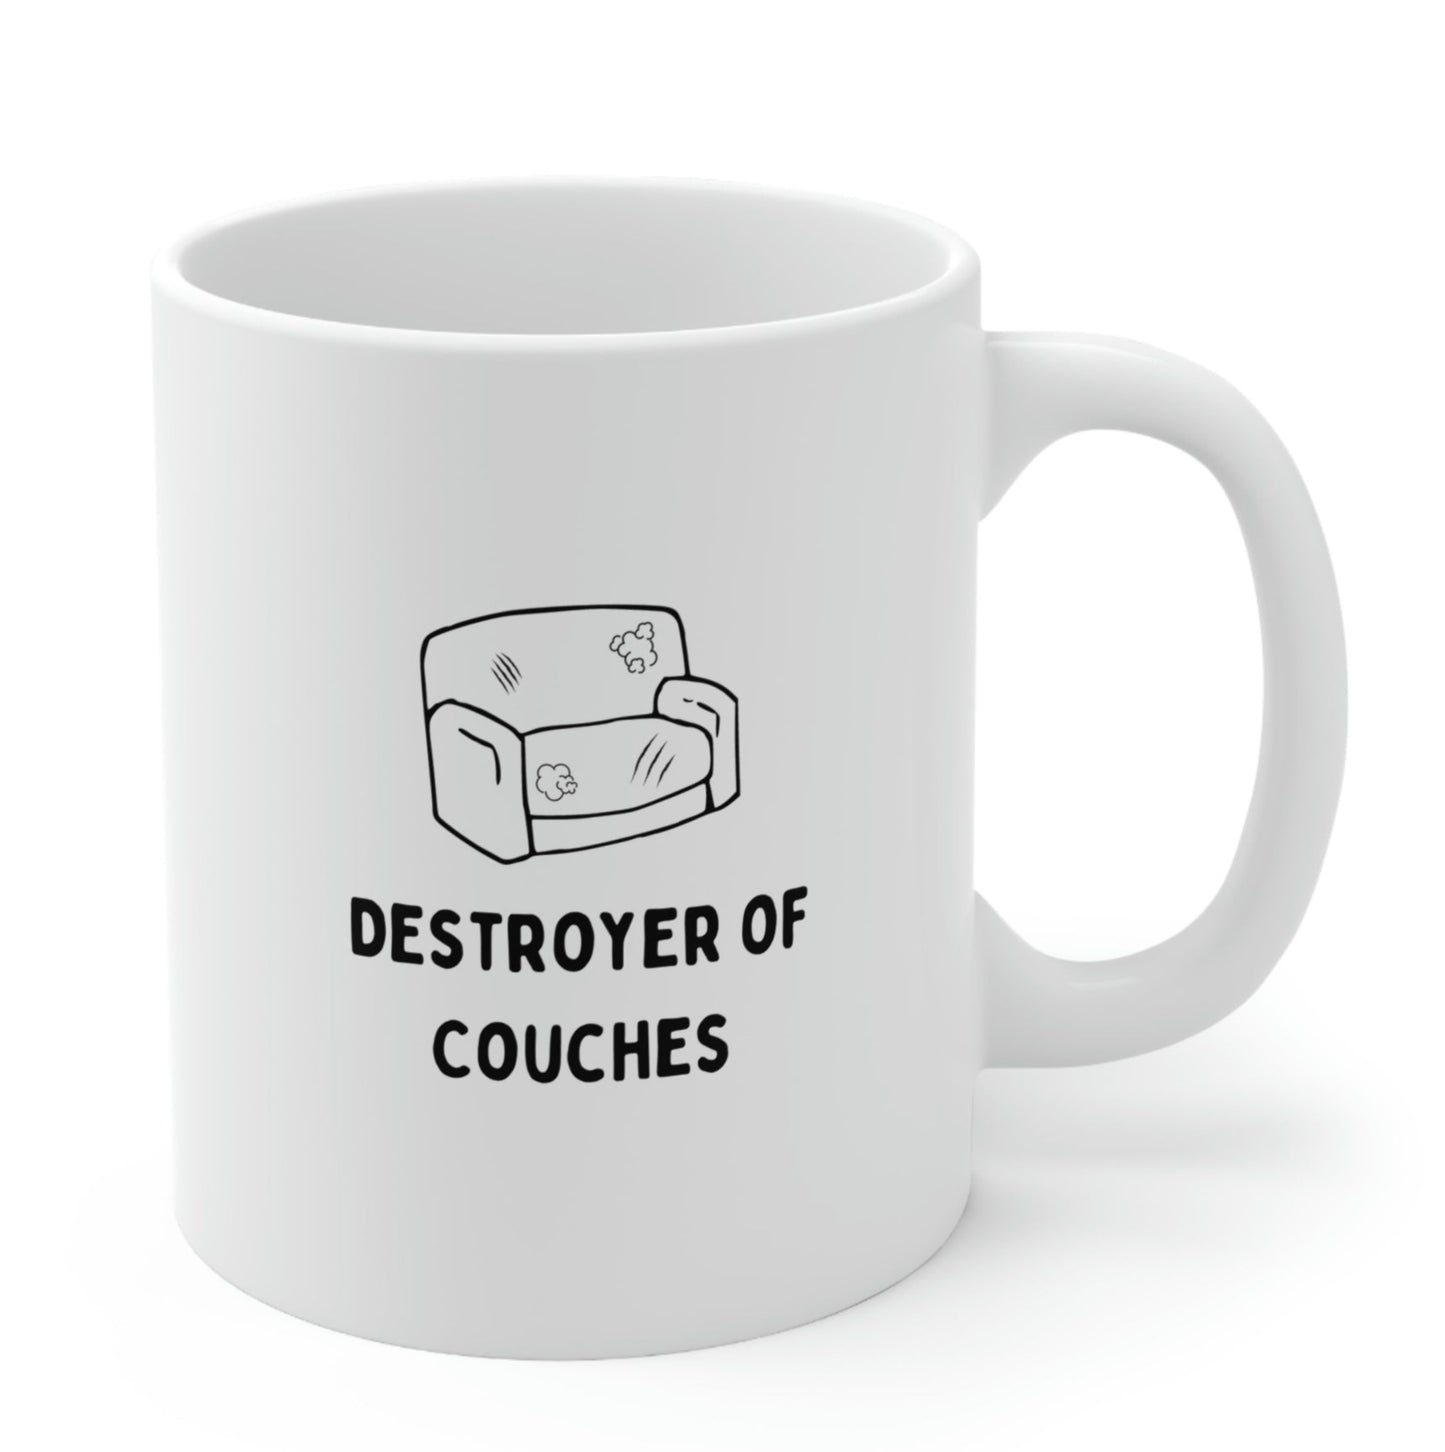 The Cat Destroyer Of Couches Coffee Tea Mug